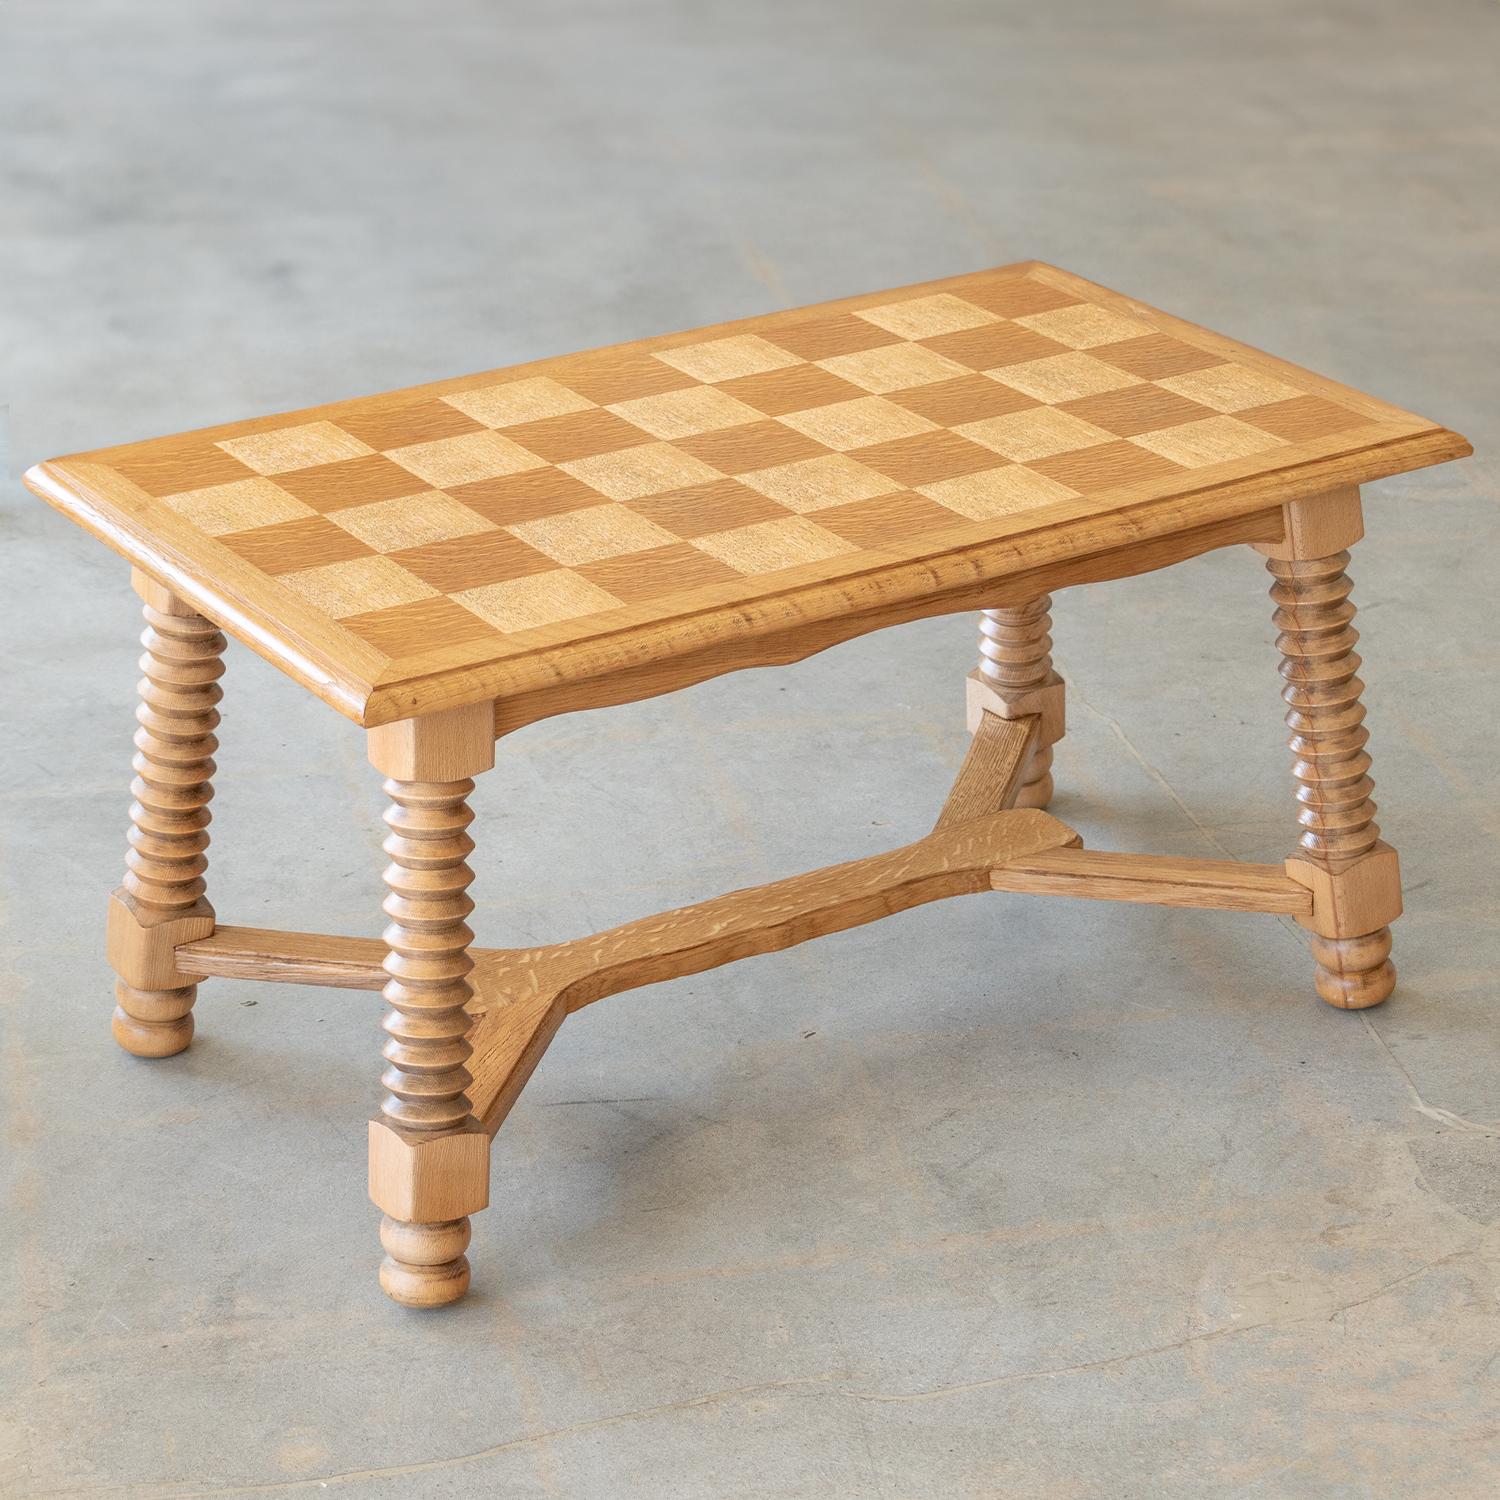 Great light oak wood table by Charles Dudouyt, 1940's. Beautiful checkered wood top with carved wood legs and ball feet. Perfect as a coffee table. Newly refinished in a light stain shows natural grain.